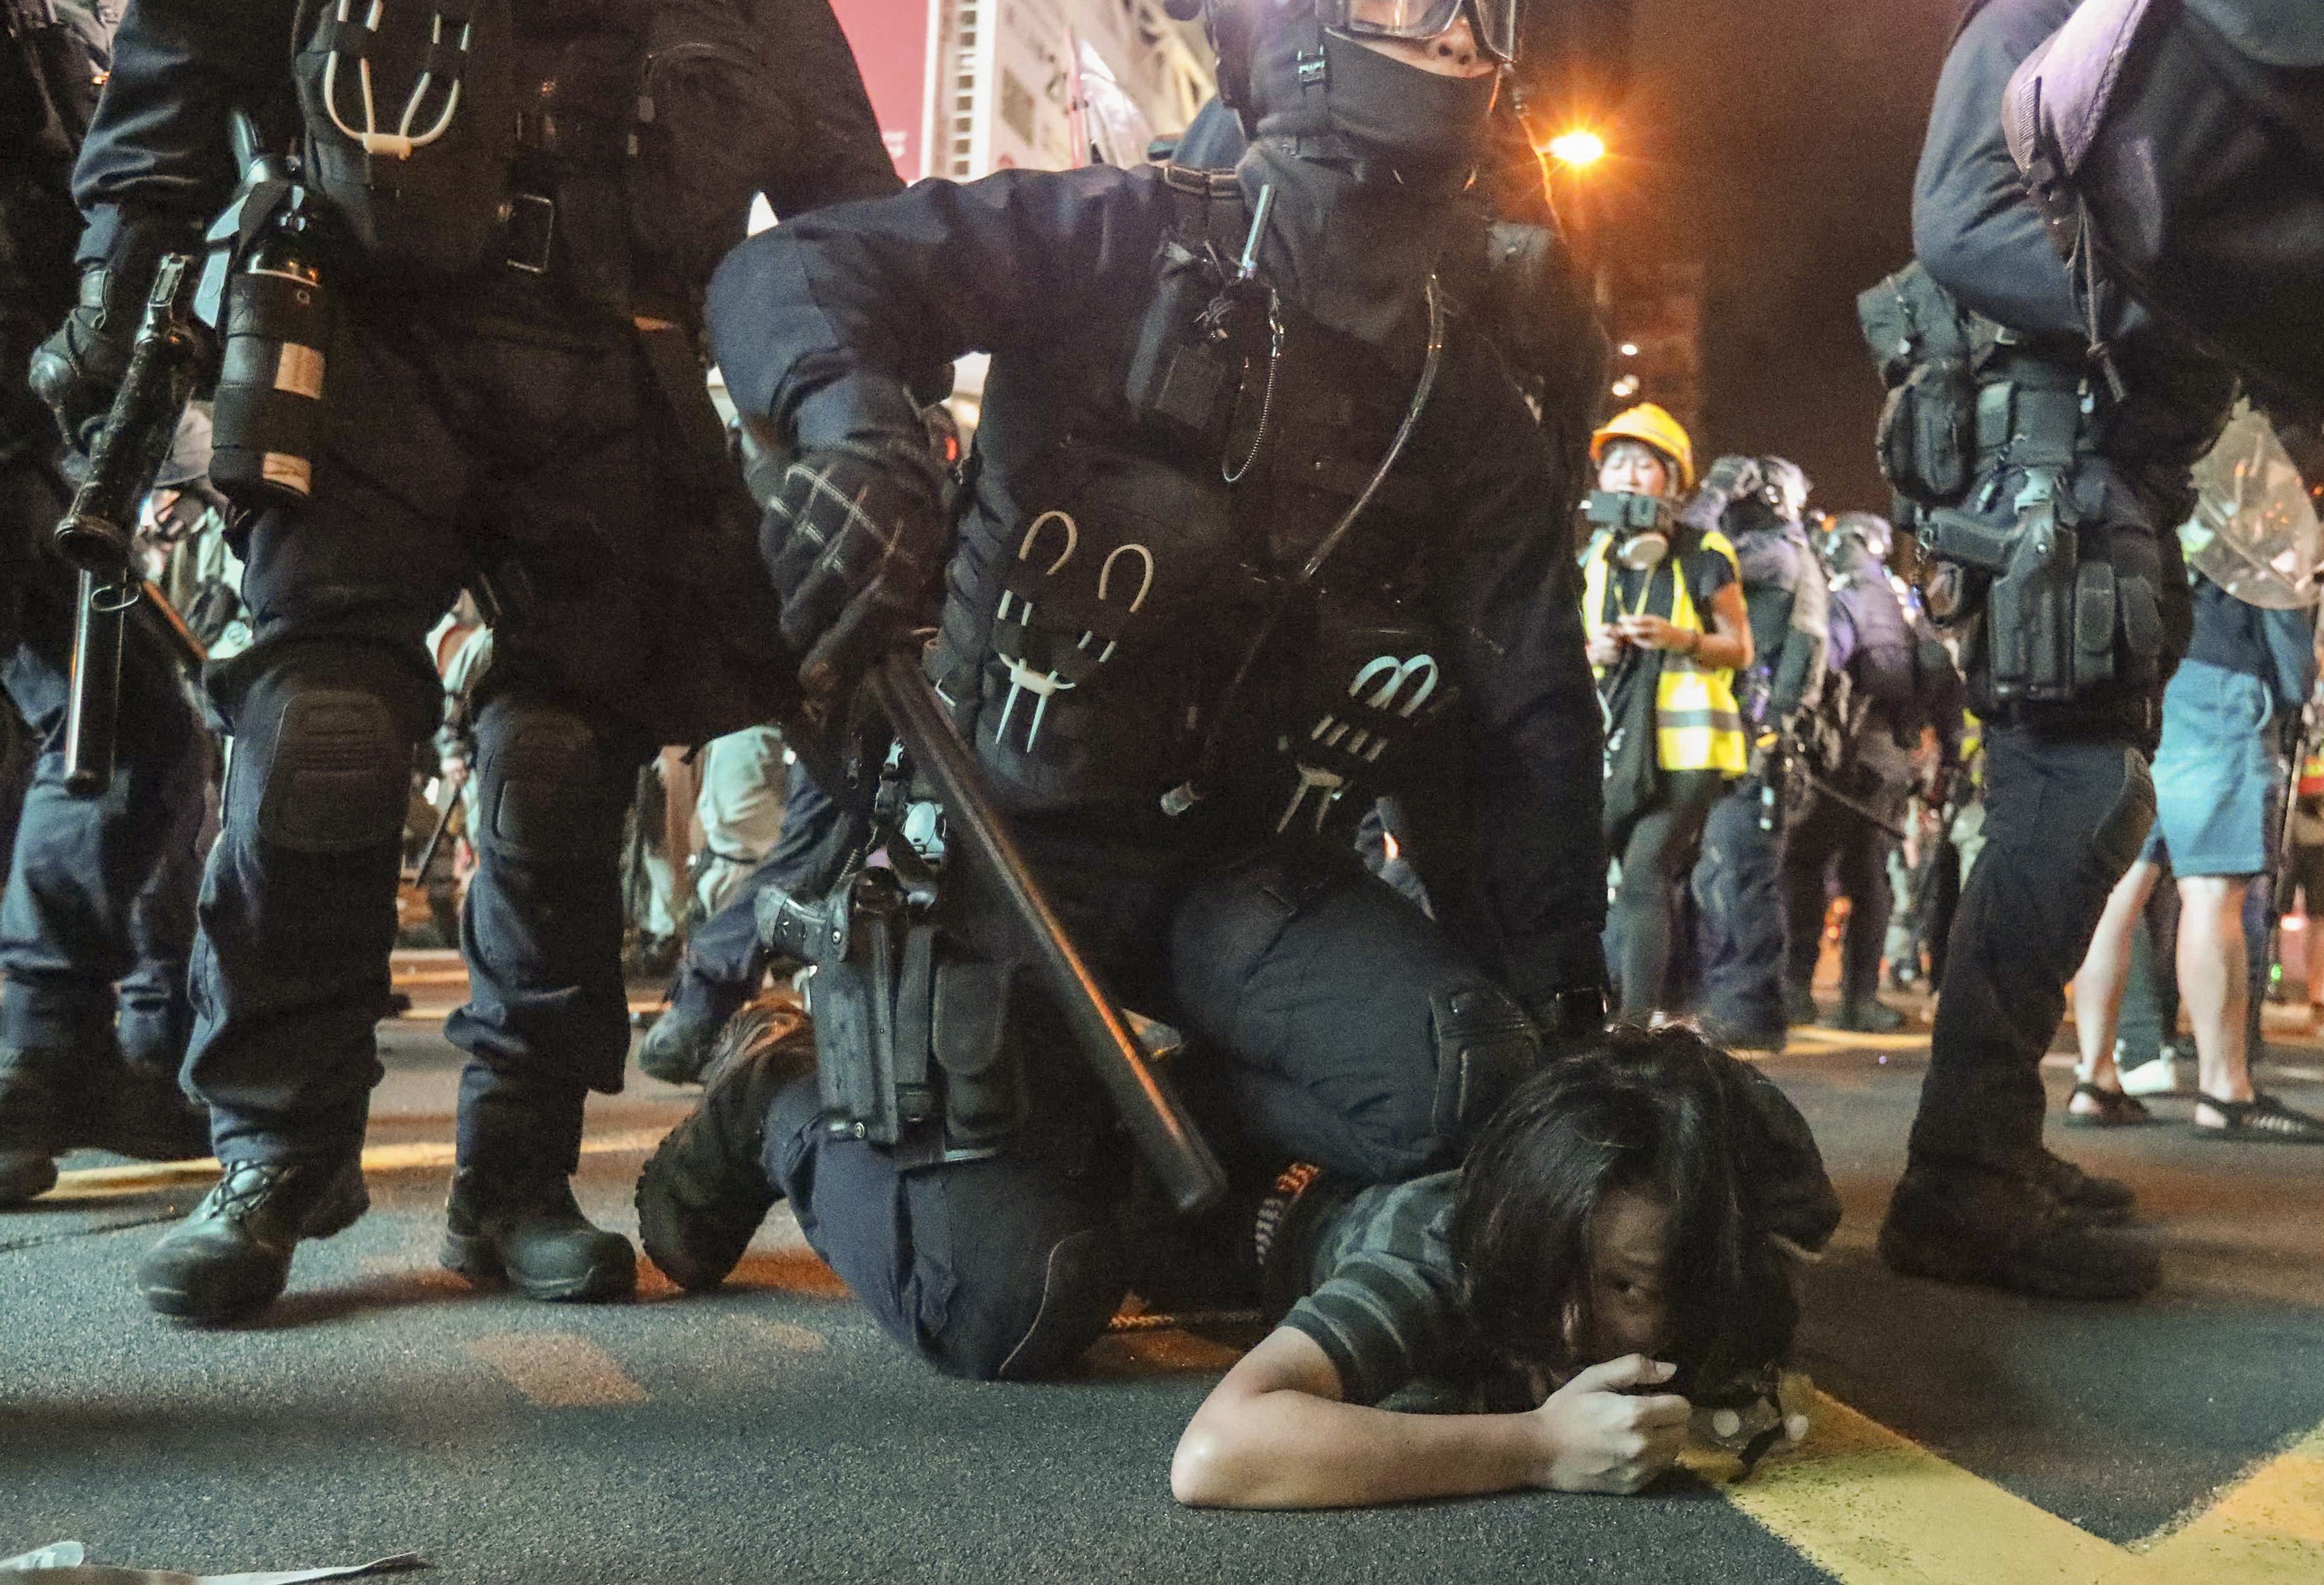 A riot police officer pins a protester to the ground during unrest in Mong Kok. Photo: Felix Wong